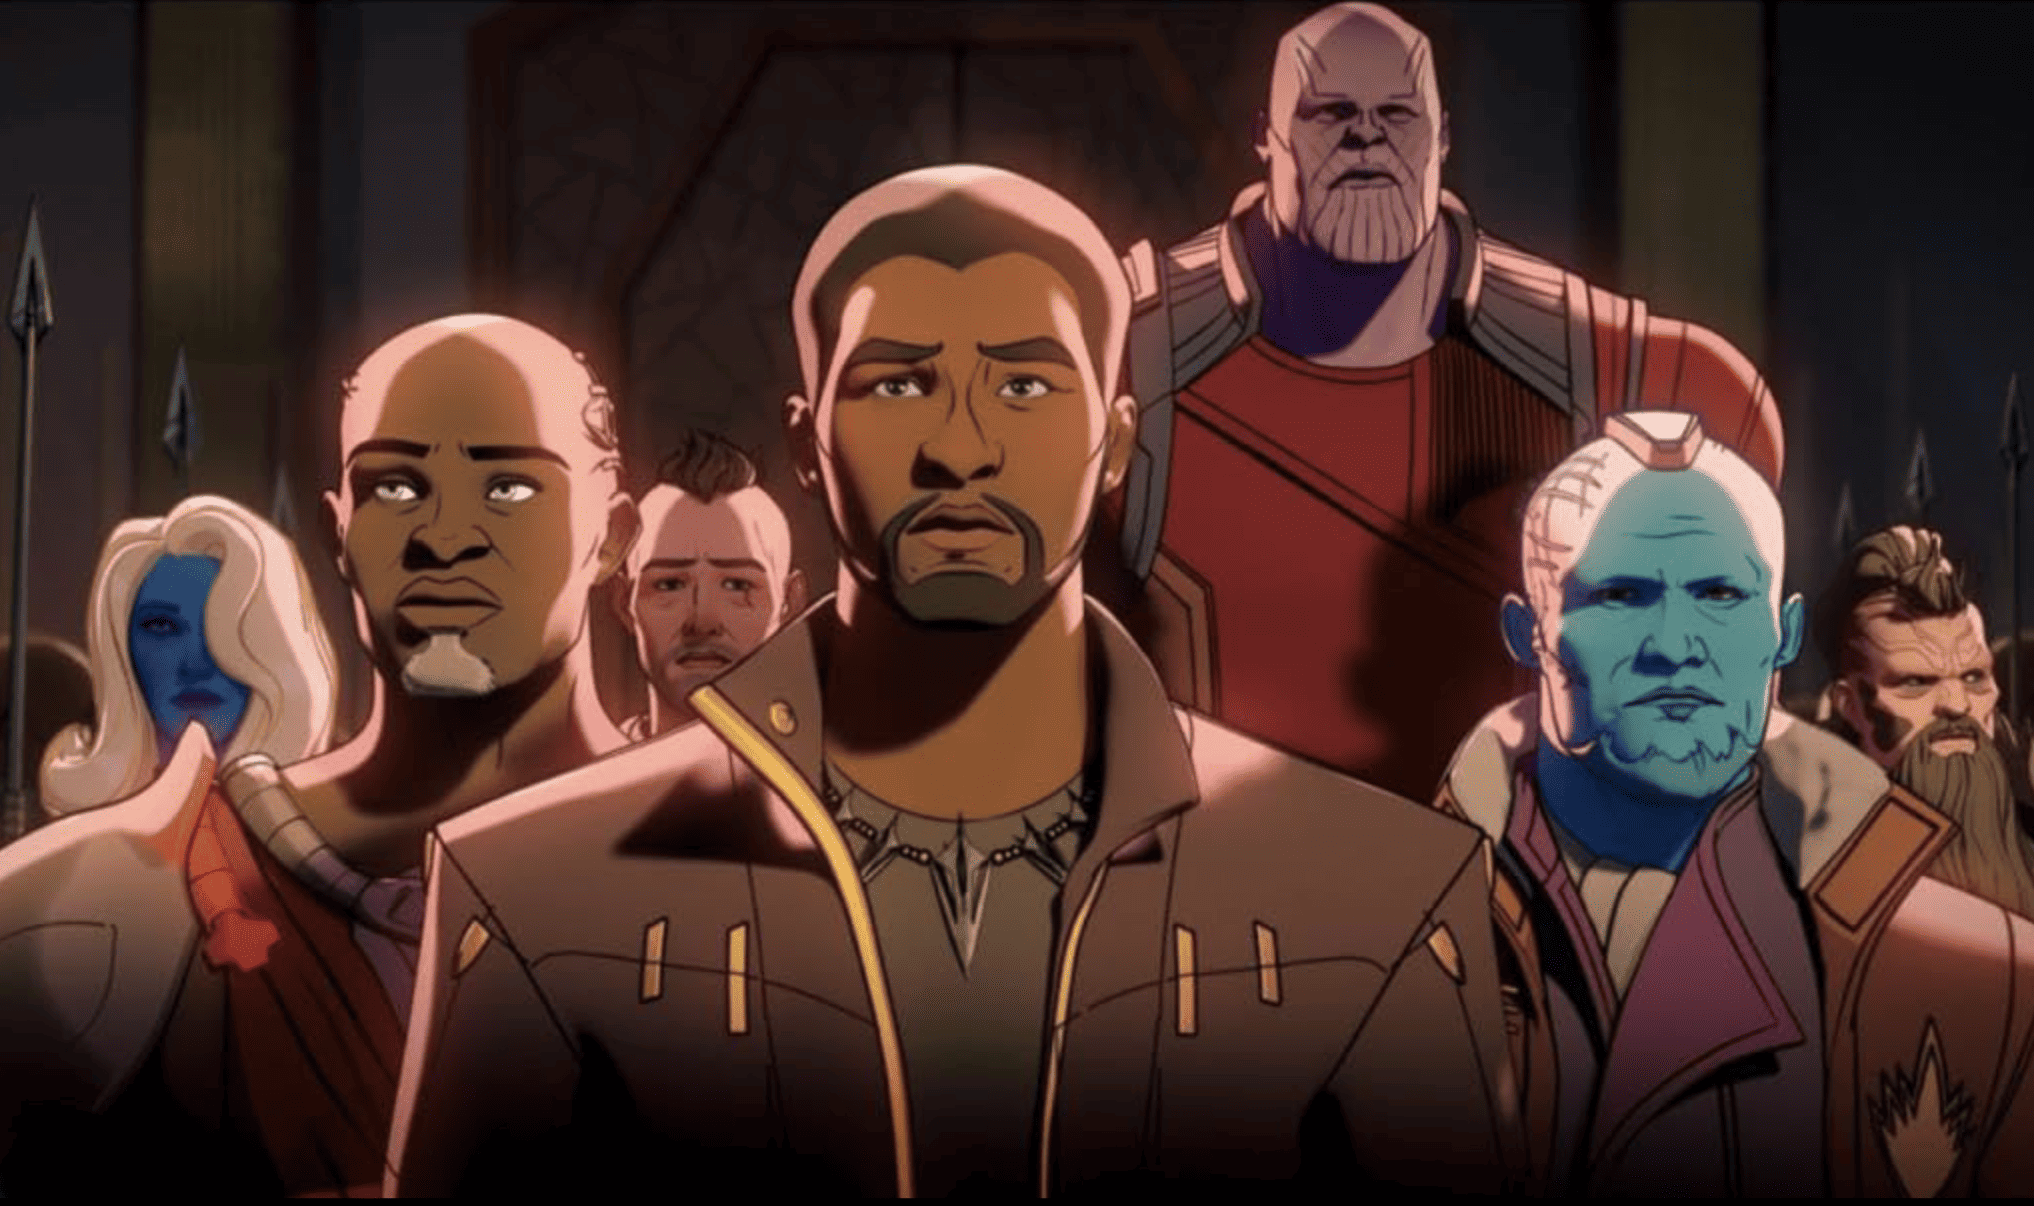 A group of seven Marvel characters staring off camera as if in defiance in this image from Marvel Studios Animation